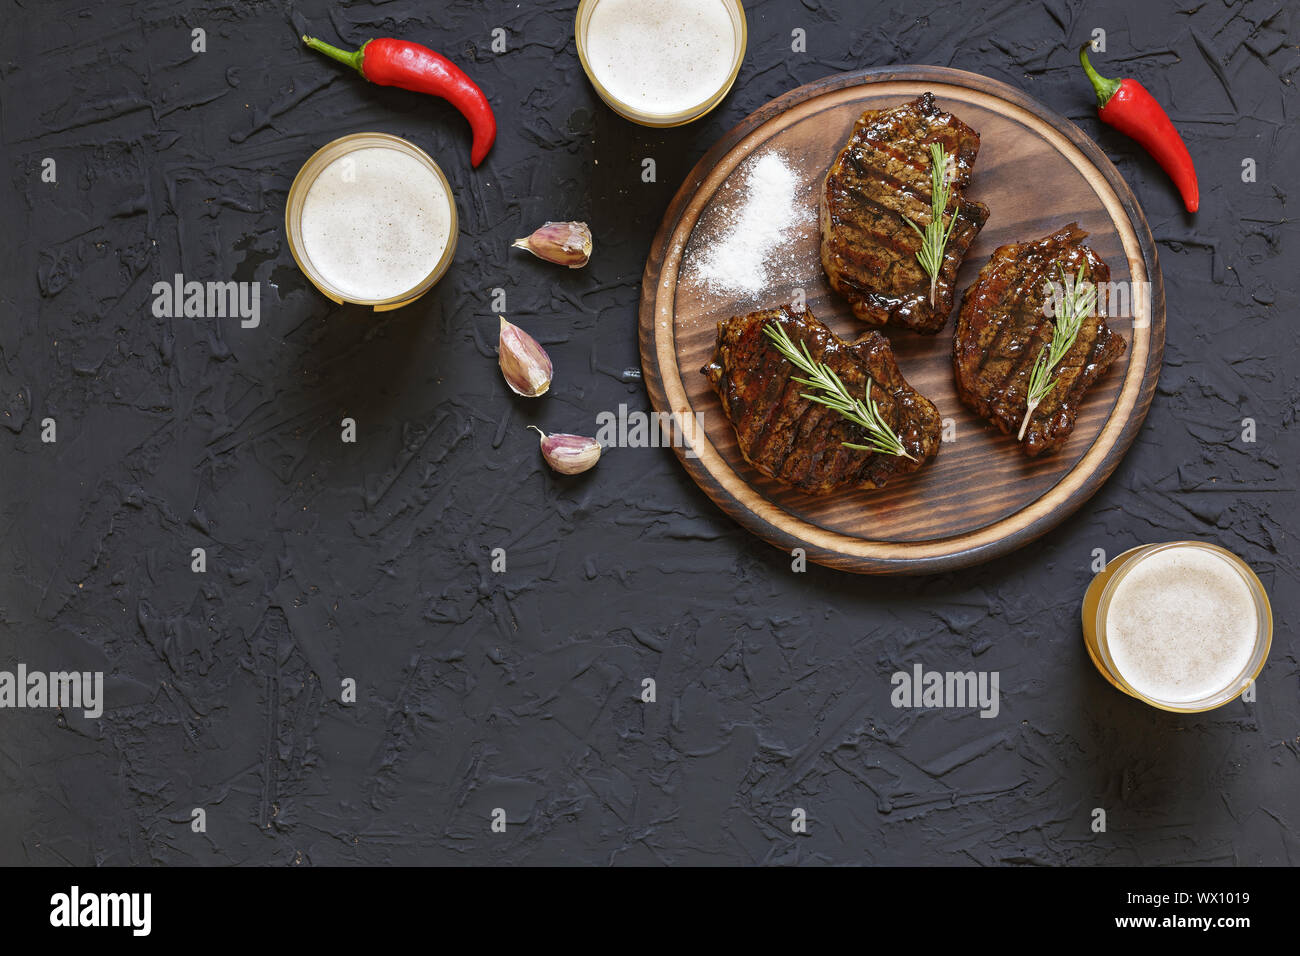 BBQ, steaks, beer, black stone, cherry tomatoes, chili peppers, rosemary. eating outdoor. copy space Stock Photo